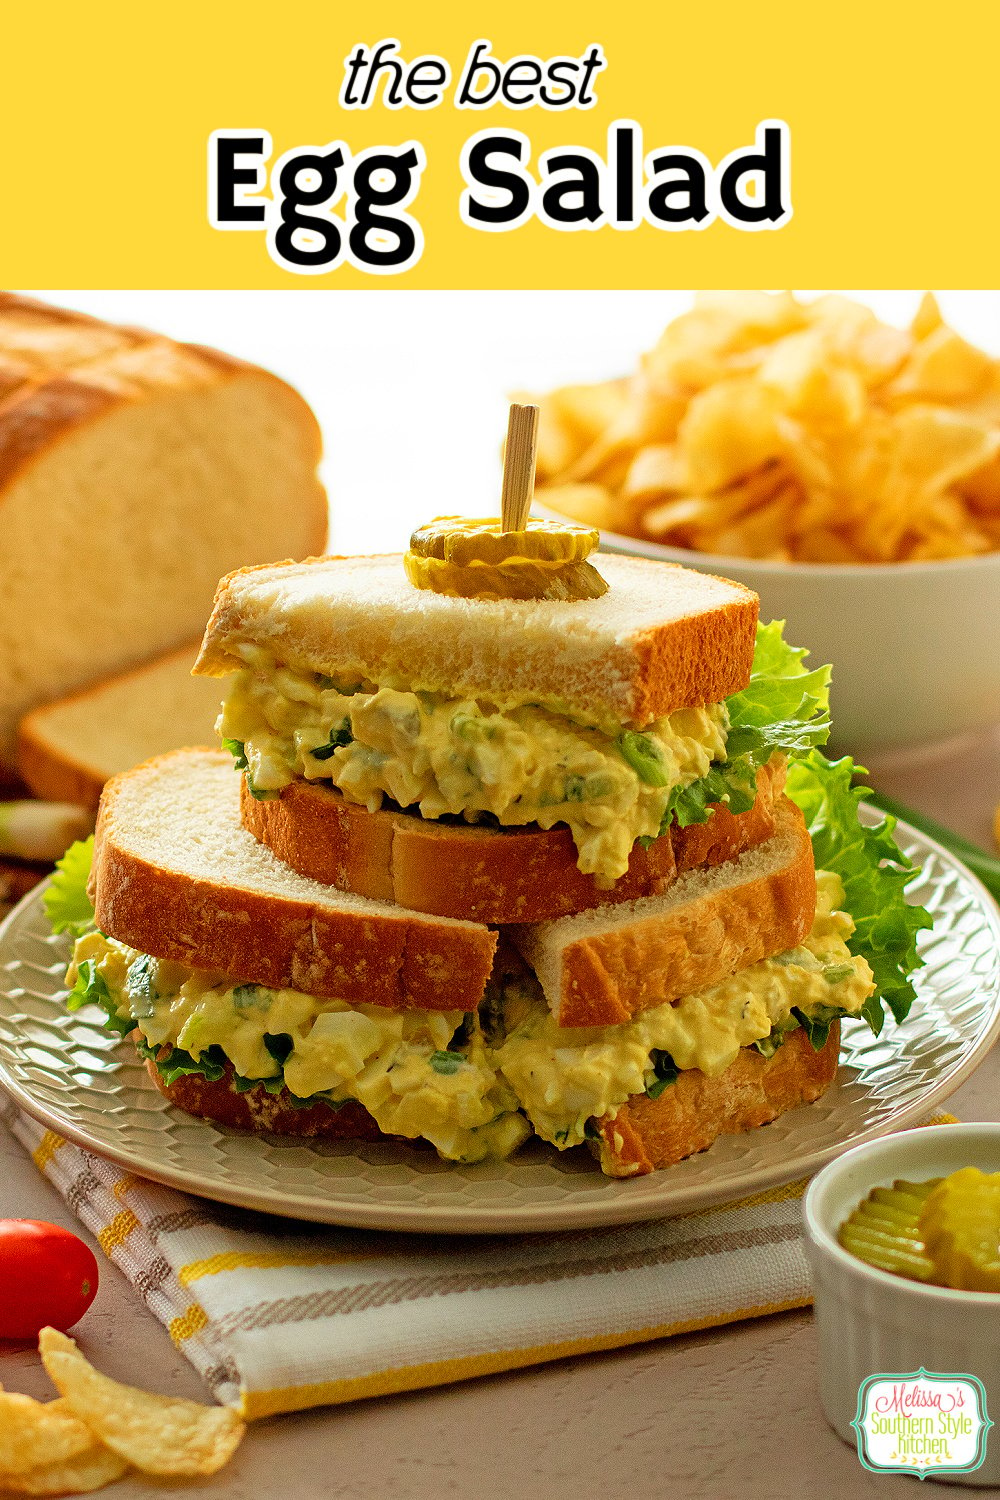 This easy Egg Salad Recipe can be served on artisan bread, rolls or croissants for a quick and delicious meal #eggsalad #saladrecipes #easyeggsalad #eggrecipes #hardboiledeggs #eggrecipes